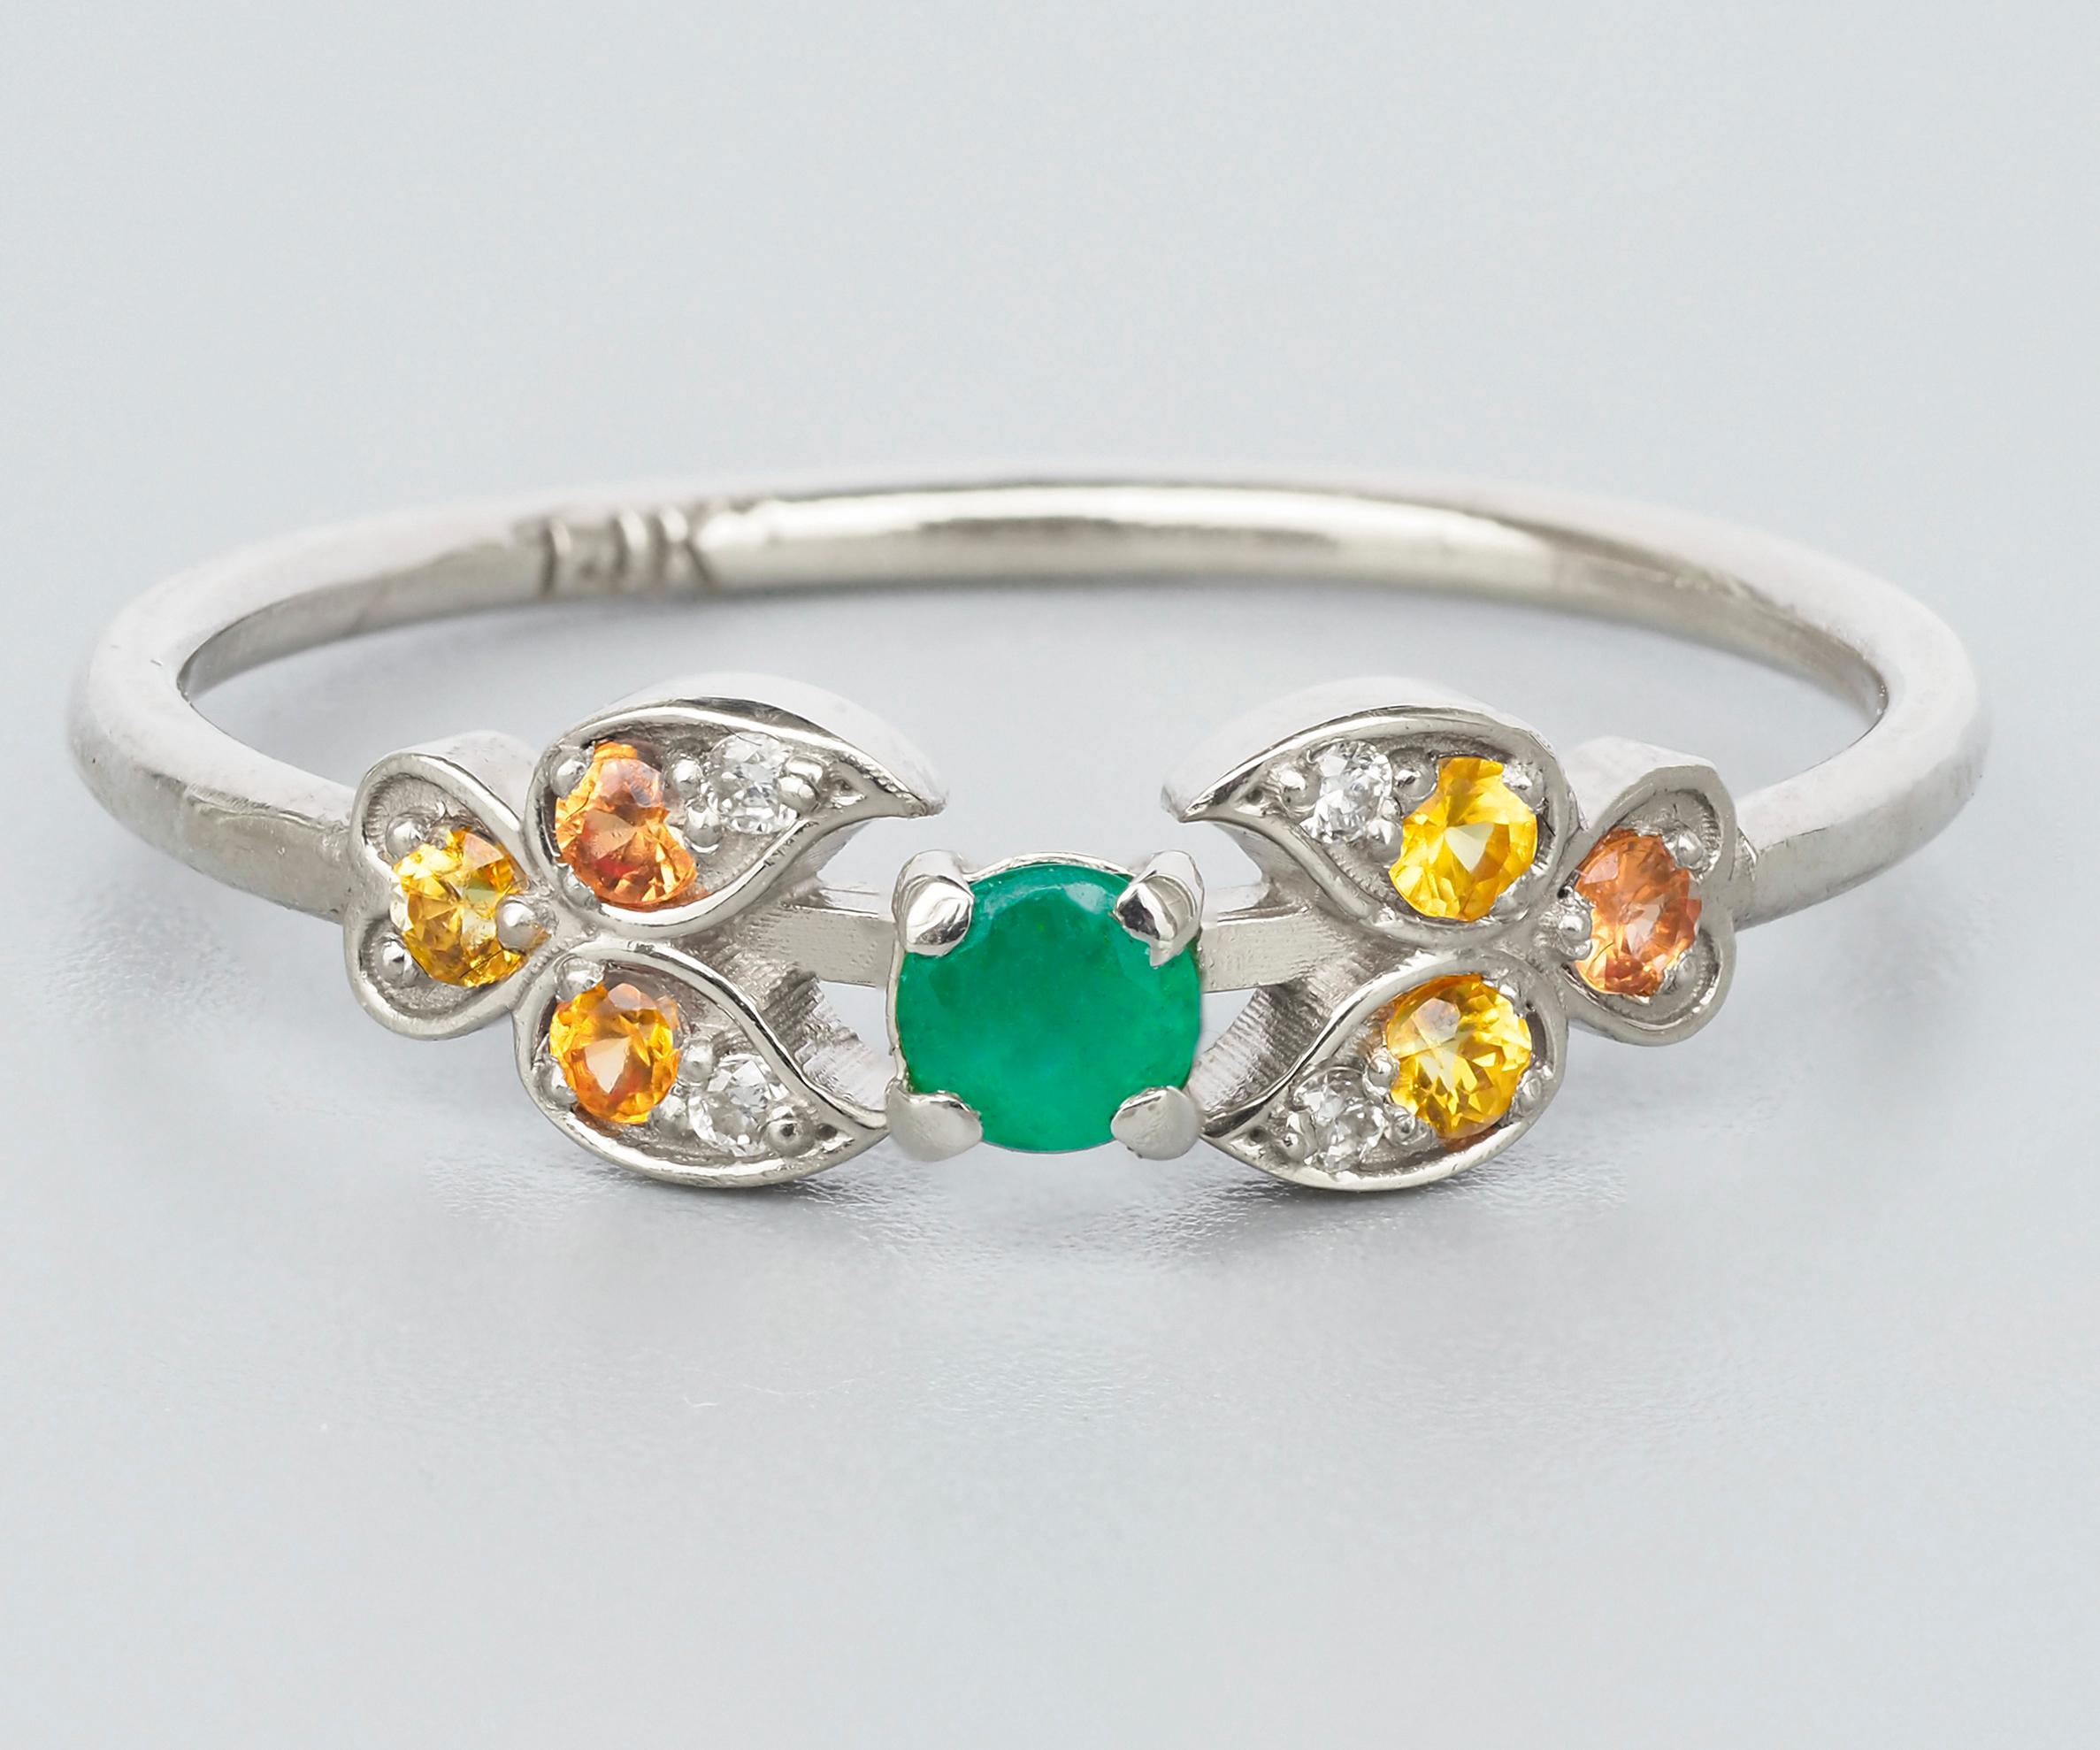 Color contrast 14 kt solid gold ring with natural emerald, diamonds and sapphires. May birthstone.
Total weight approx. 1.50 g.

Gemstones:
Natural emerald: 1 piece, weight - 0.30 ct, round shape, green color, SI clarity (transparent with